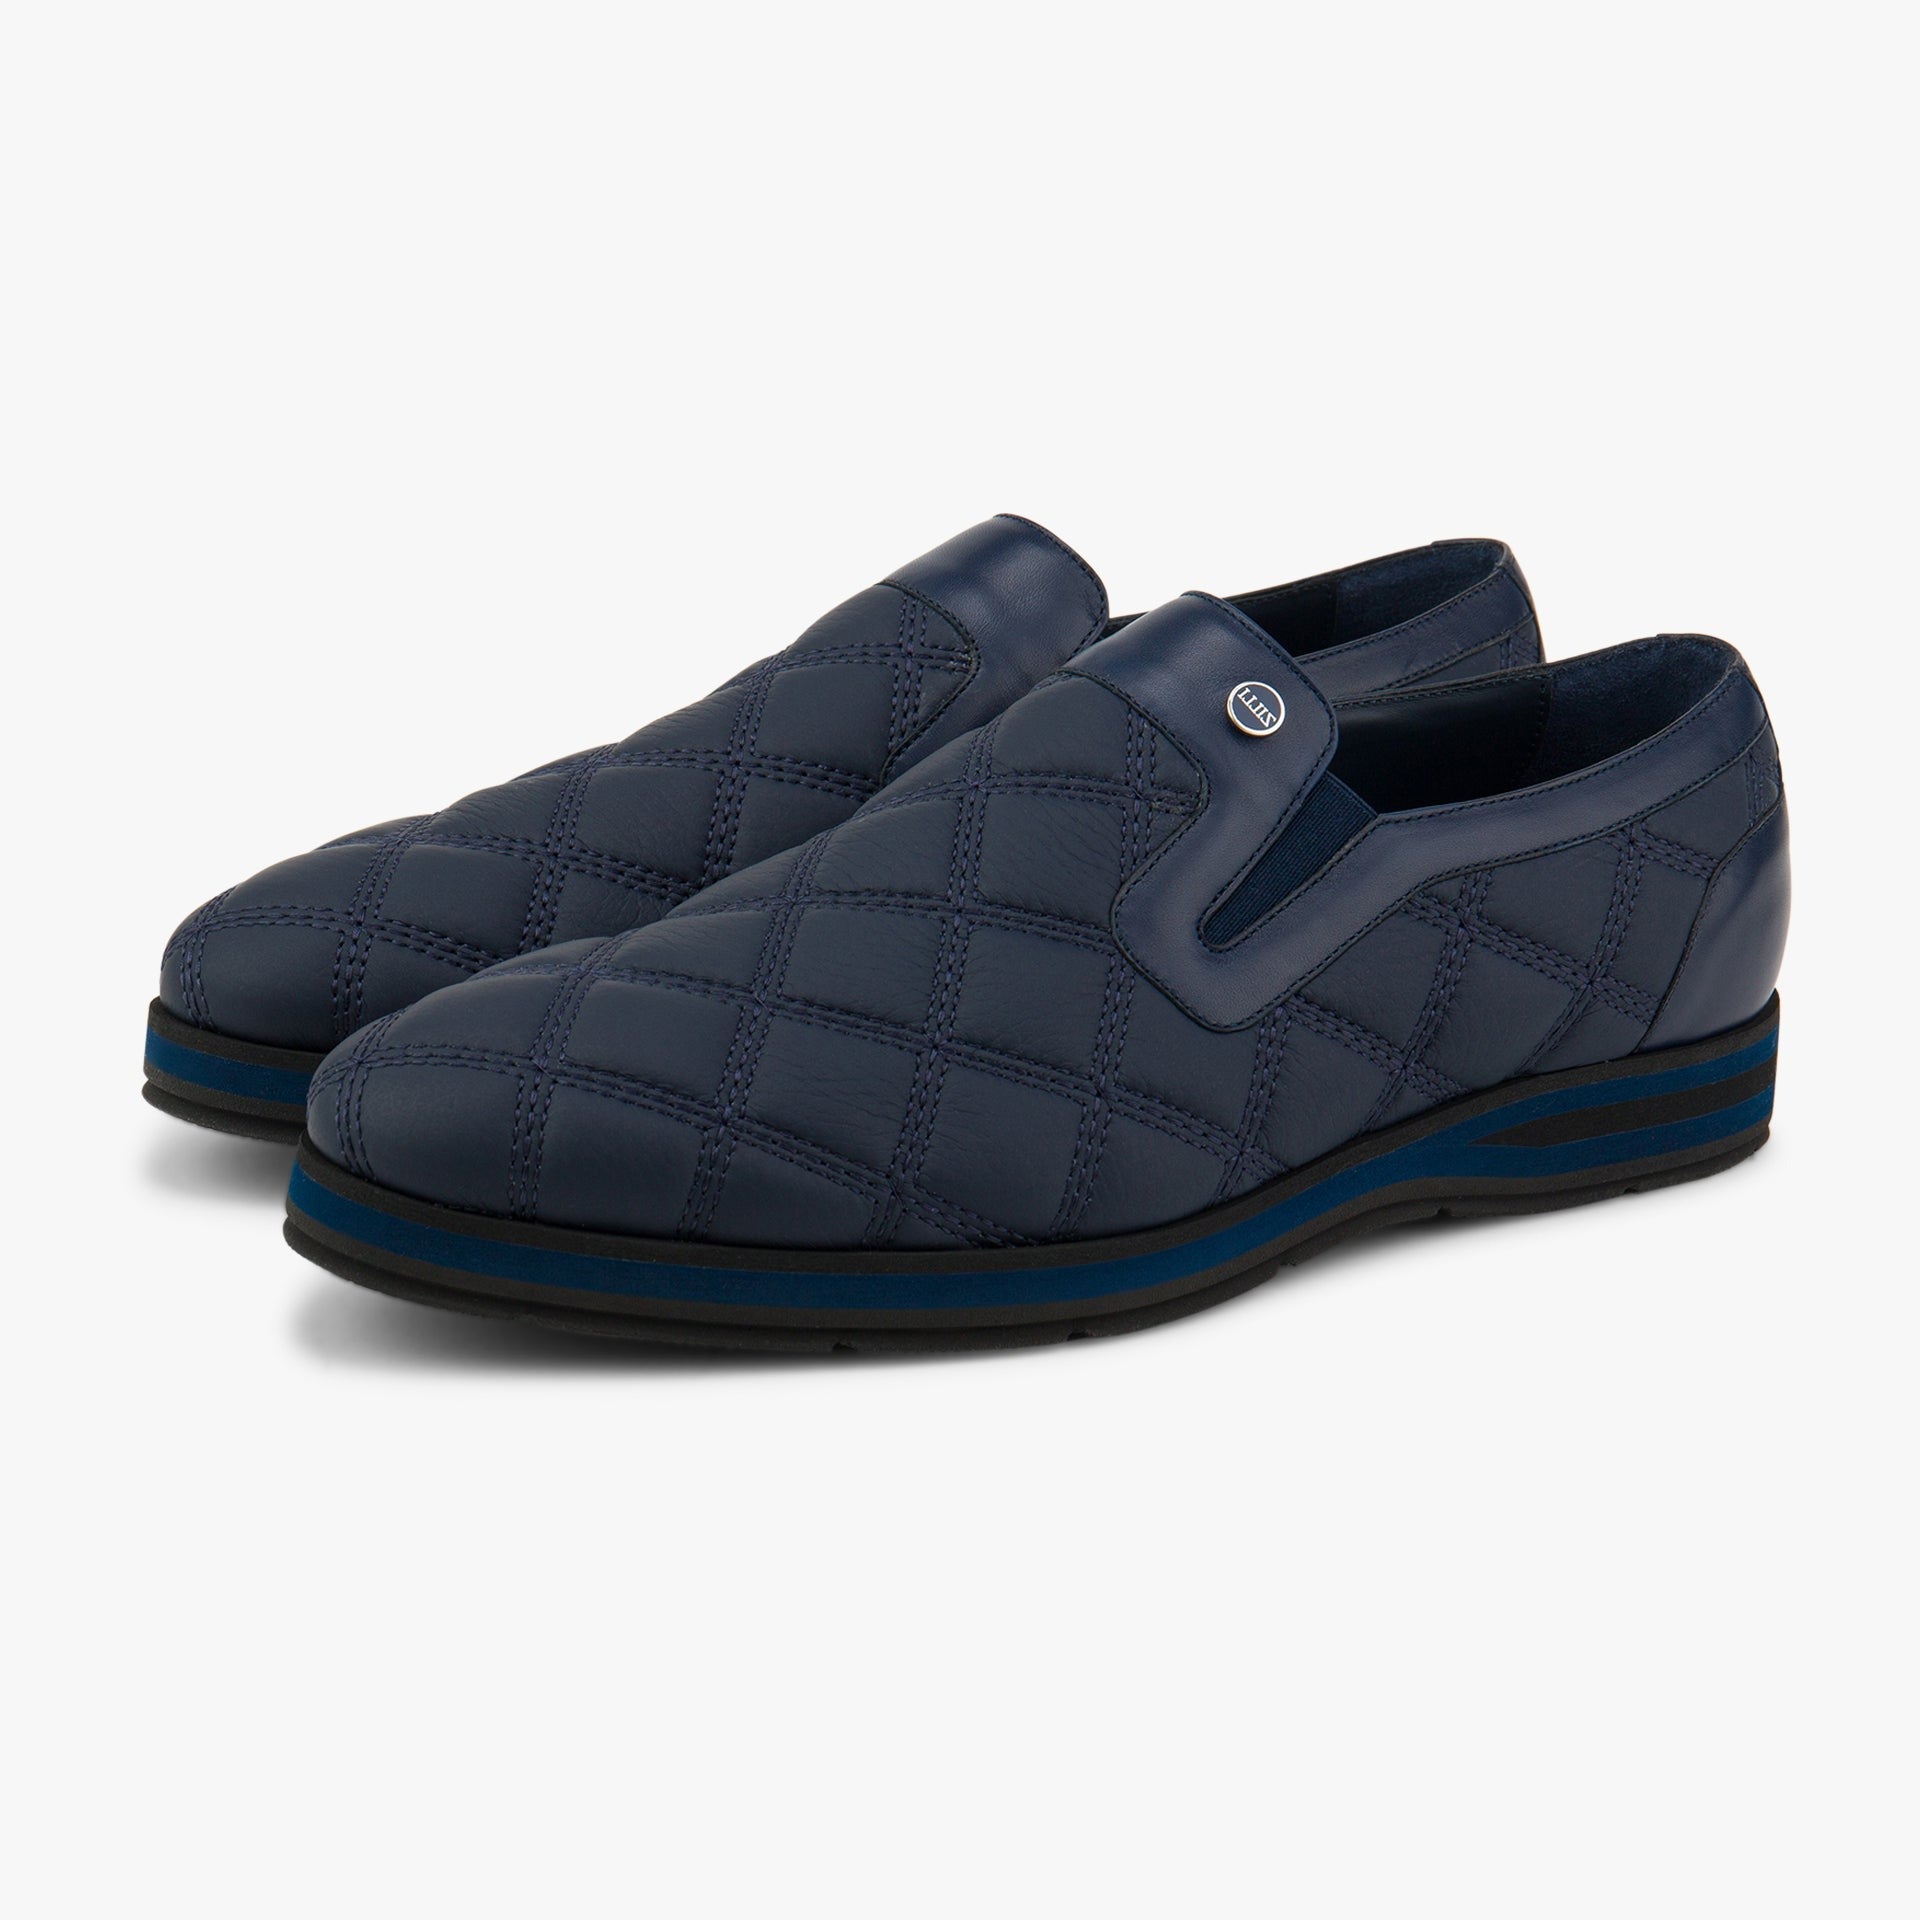 Zilli Pompei Calf Leather Slip-Ons with Boston Quilted Detailing